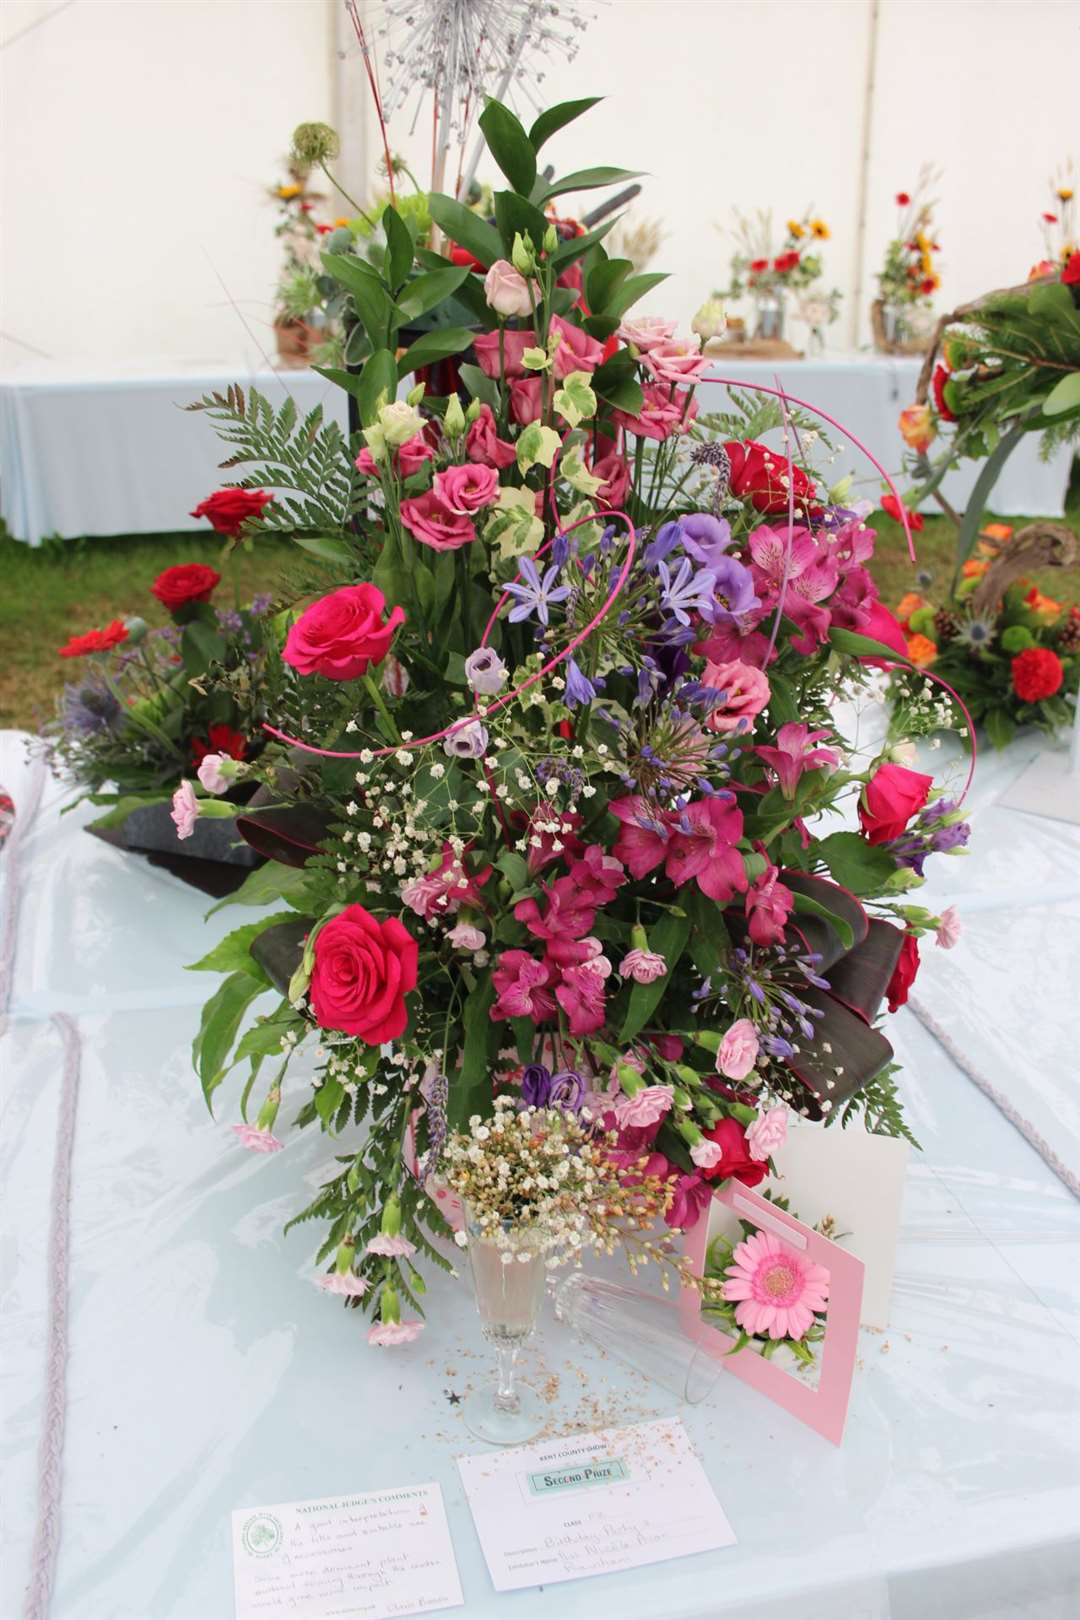 Nicola Prior, who runs Nic's Restaurant in Queenborough, came second in the Kent County Show flower competition 'Birthday Party' category. Judge Chris Brown said it was a "good interpretation of the title and suitable use of accessories." (13545735)